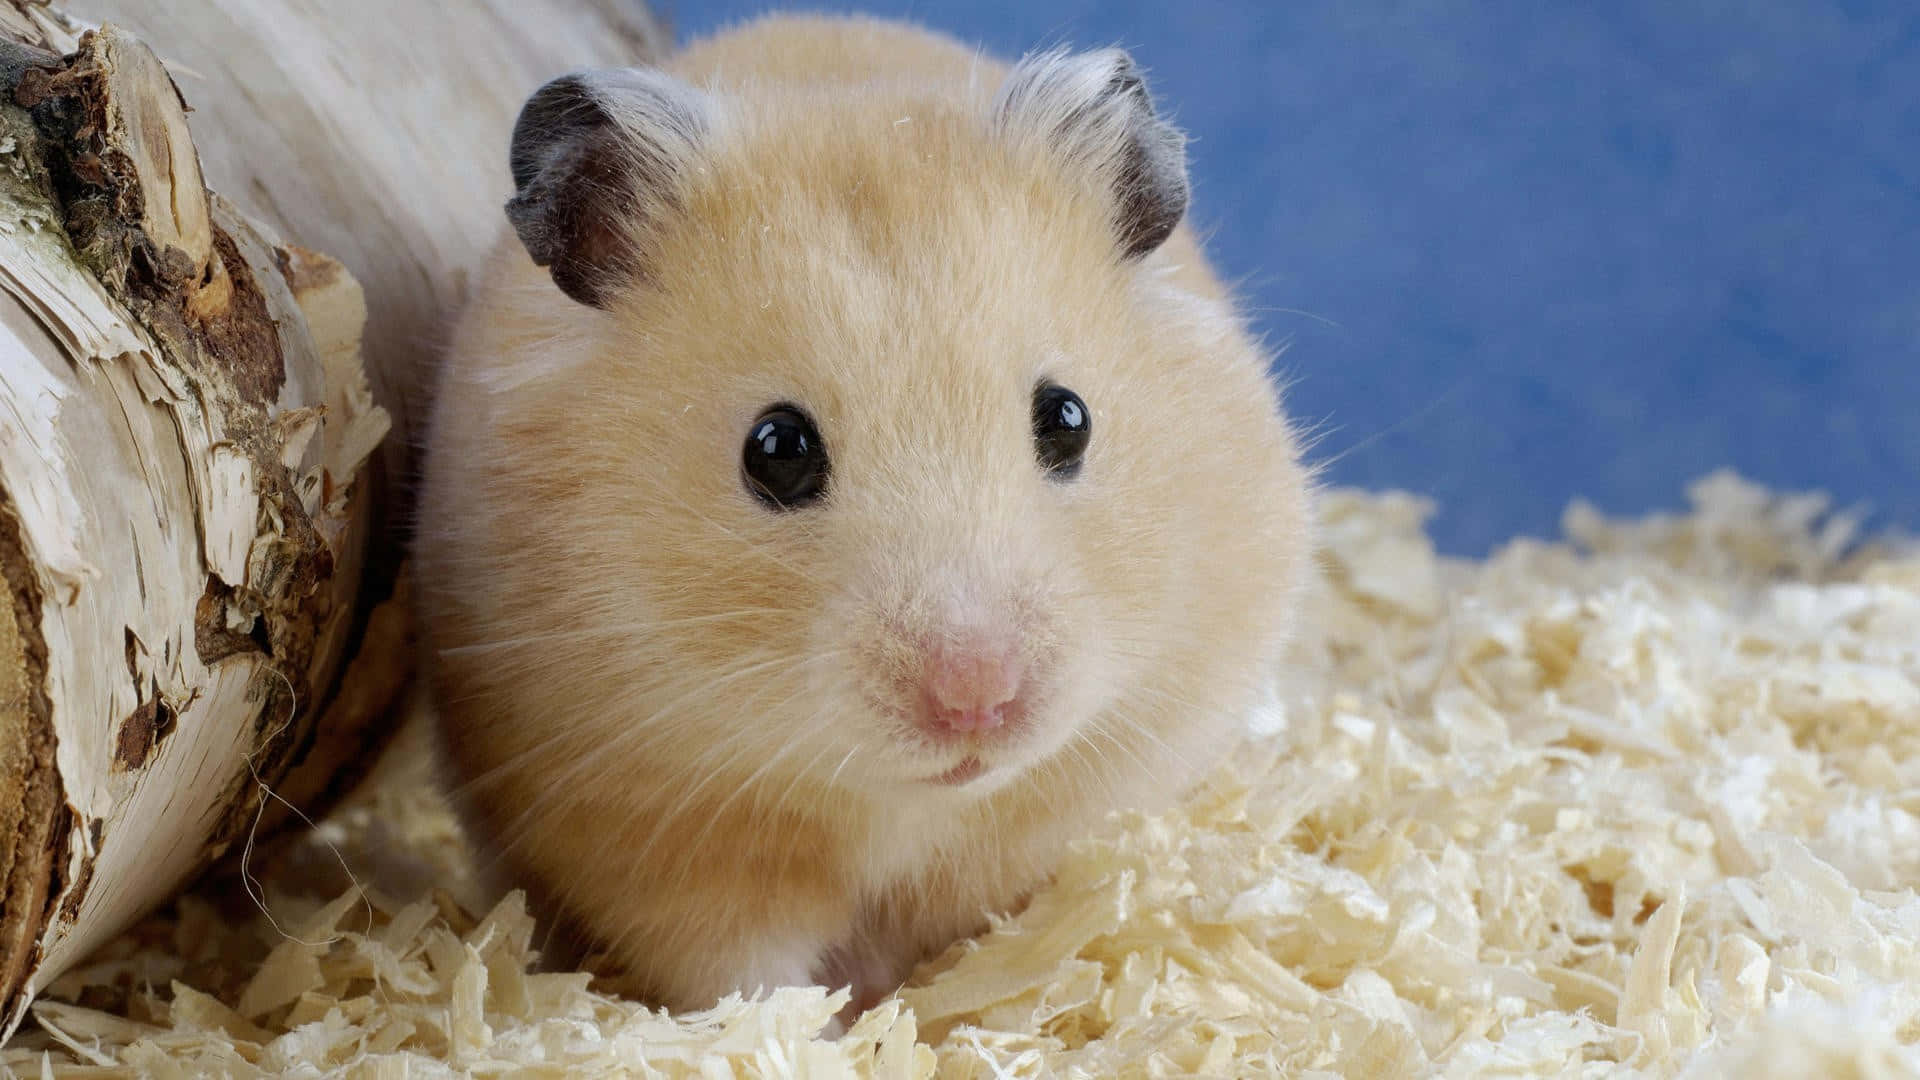 A Little Hamster Pauses To Look Around Background